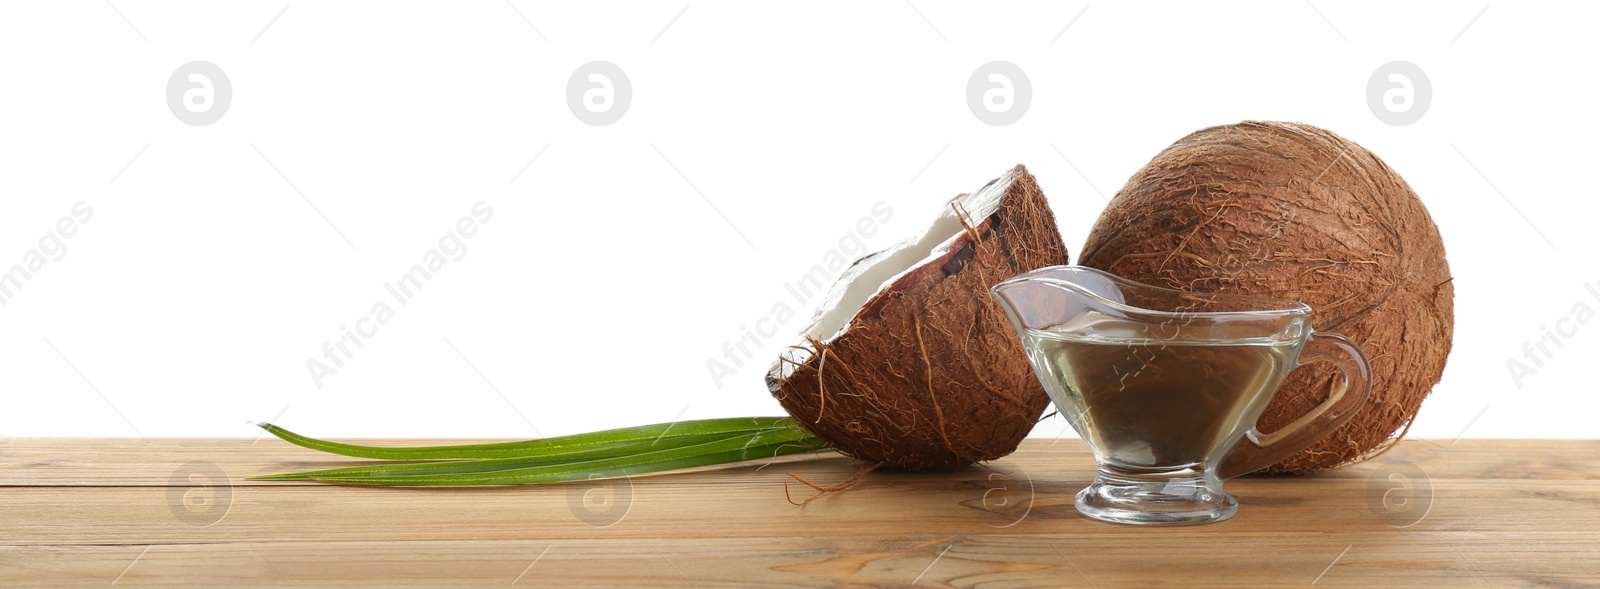 Photo of Ripe coconuts and gravy boat with natural organic oil on wooden table against white background